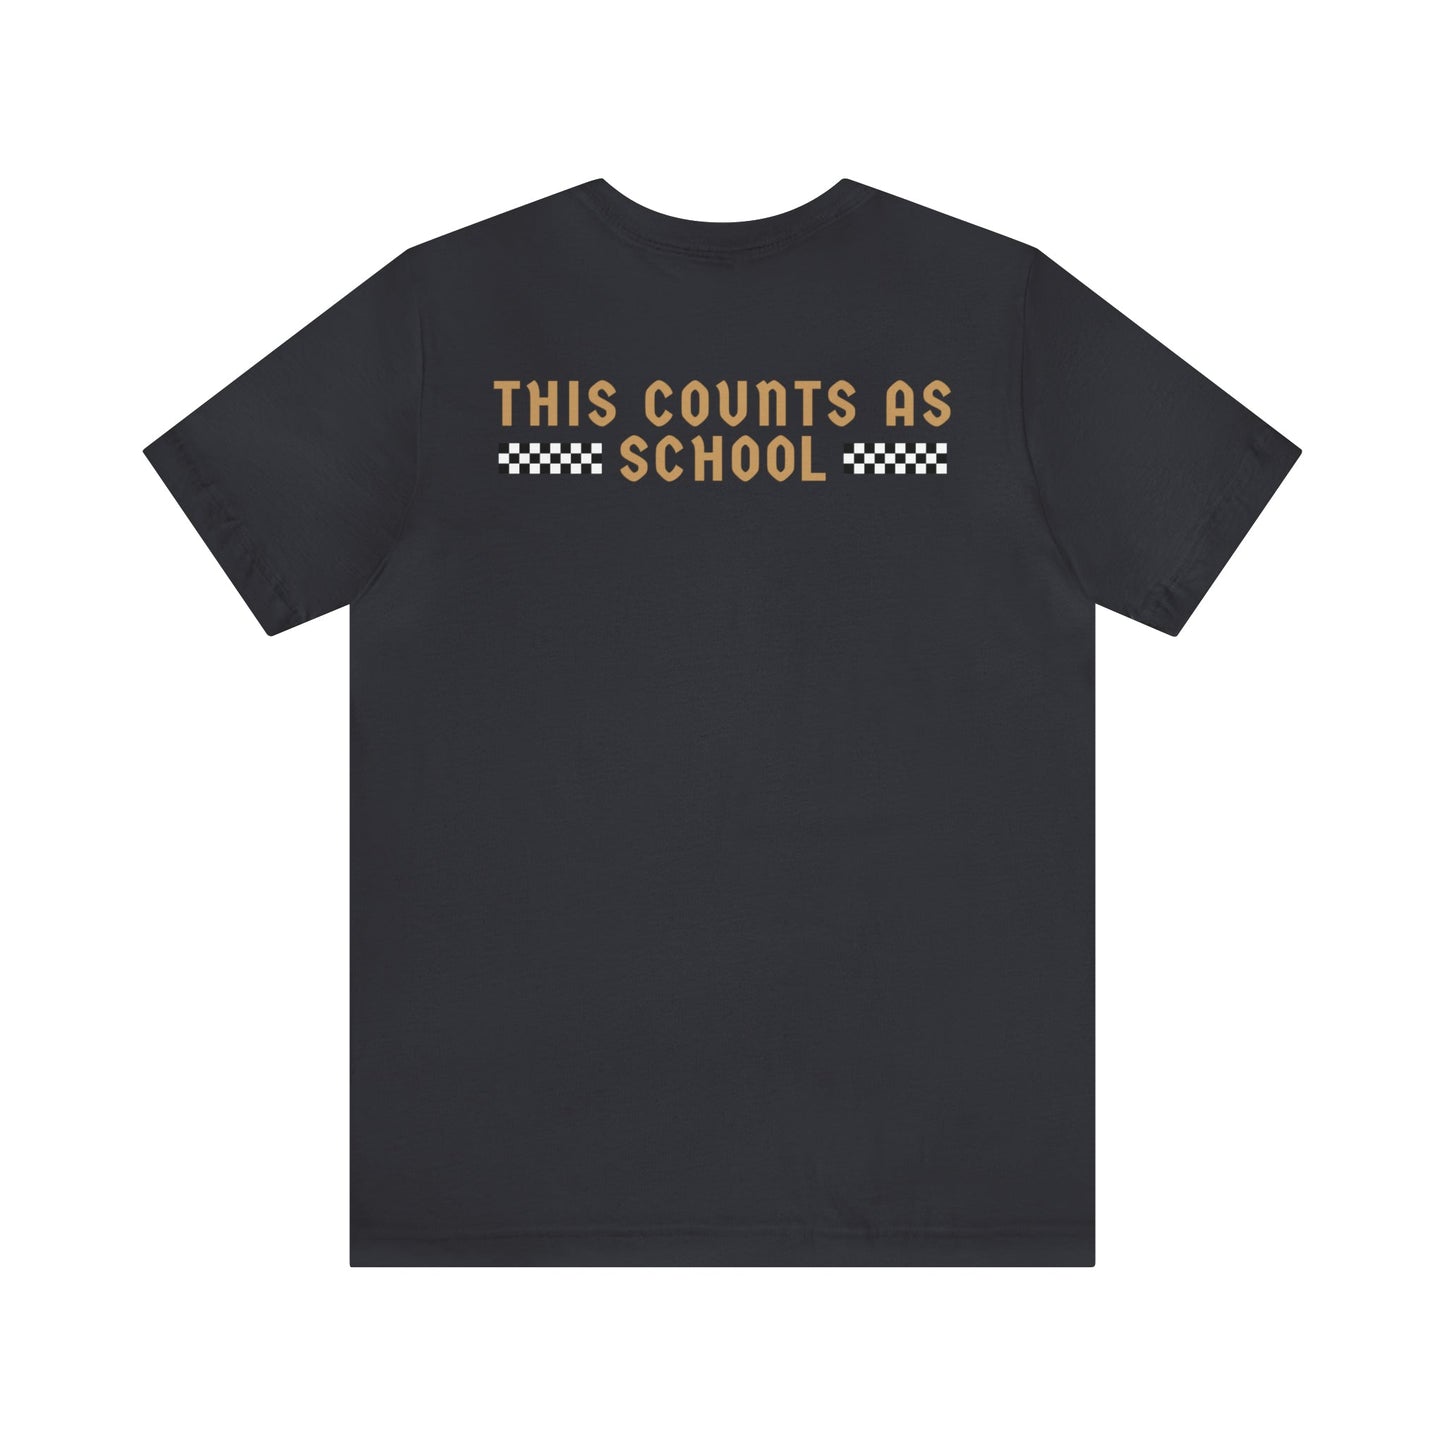 School Womens Tee ShirtWolfe Paw DesignsSchool Womens Tee ShirtFront displays: Homeschool Mom Club
Back Displays: This Counts As School 
Also in a Sweatshirt: Click Here
Bella Canvas Unisex Fit



 
S
M
L
XL
2XL
3XL




Width, iHomeschool Mom Club - This Counts as School Womens Tee Shirt